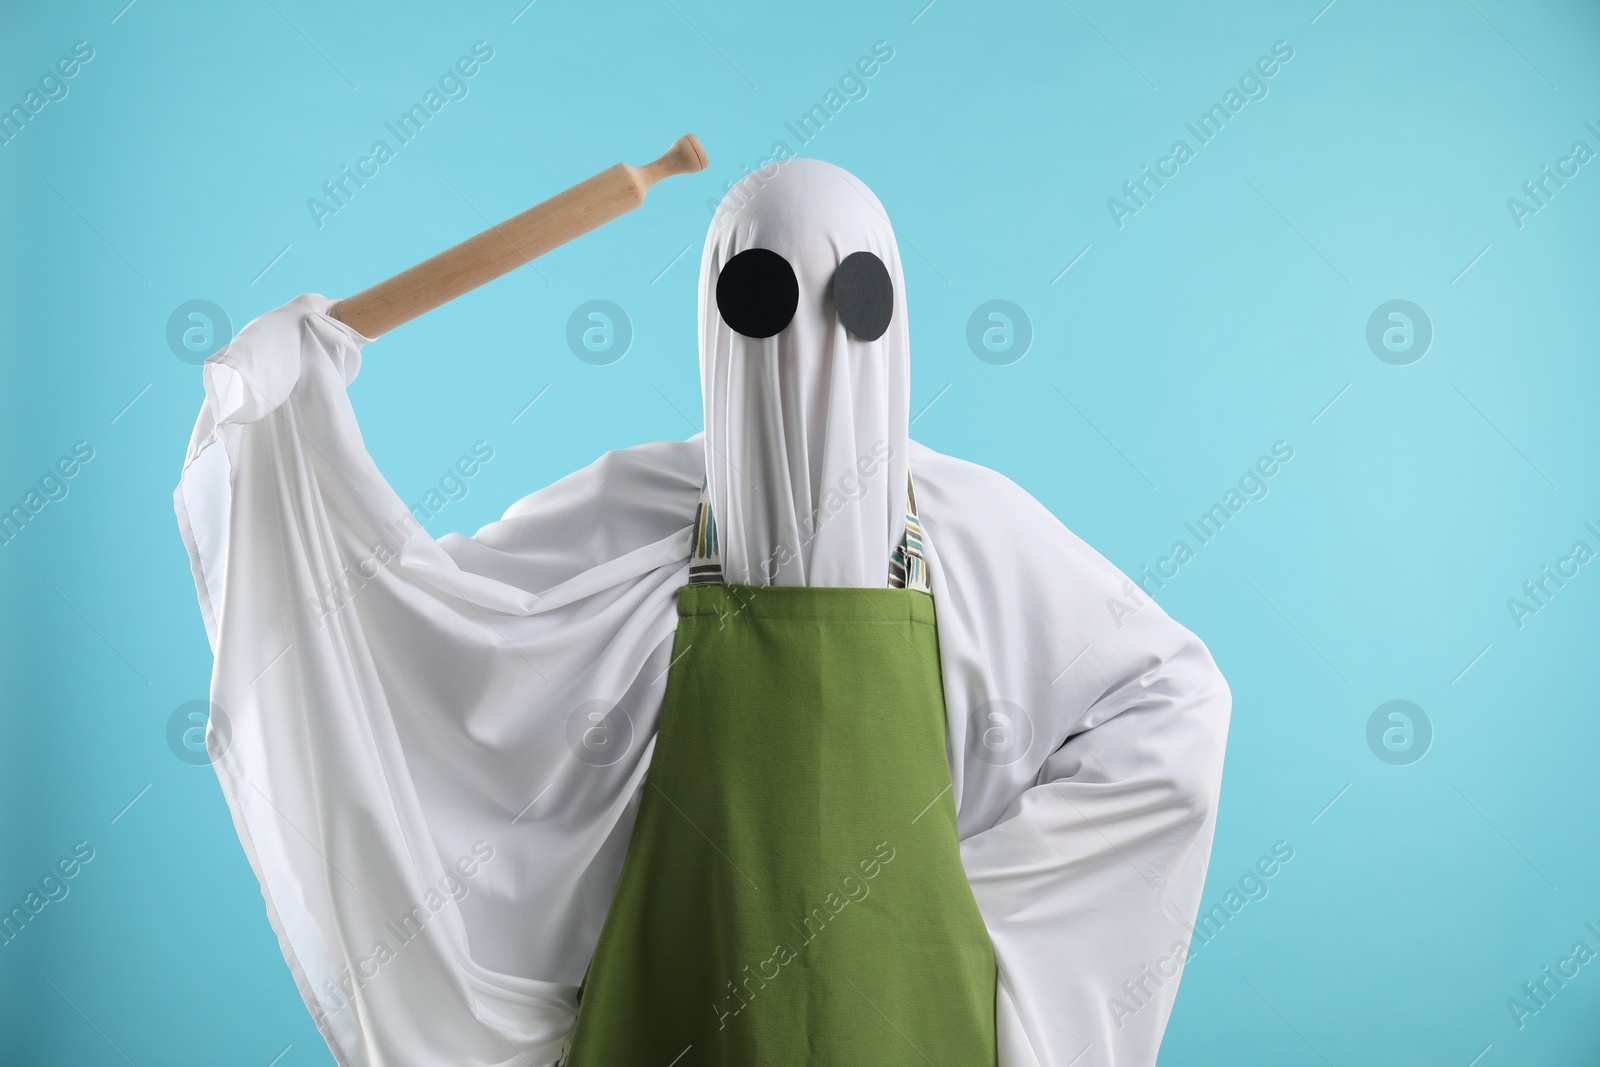 Photo of Woman in ghost costume and apron with rolling pin on light blue background